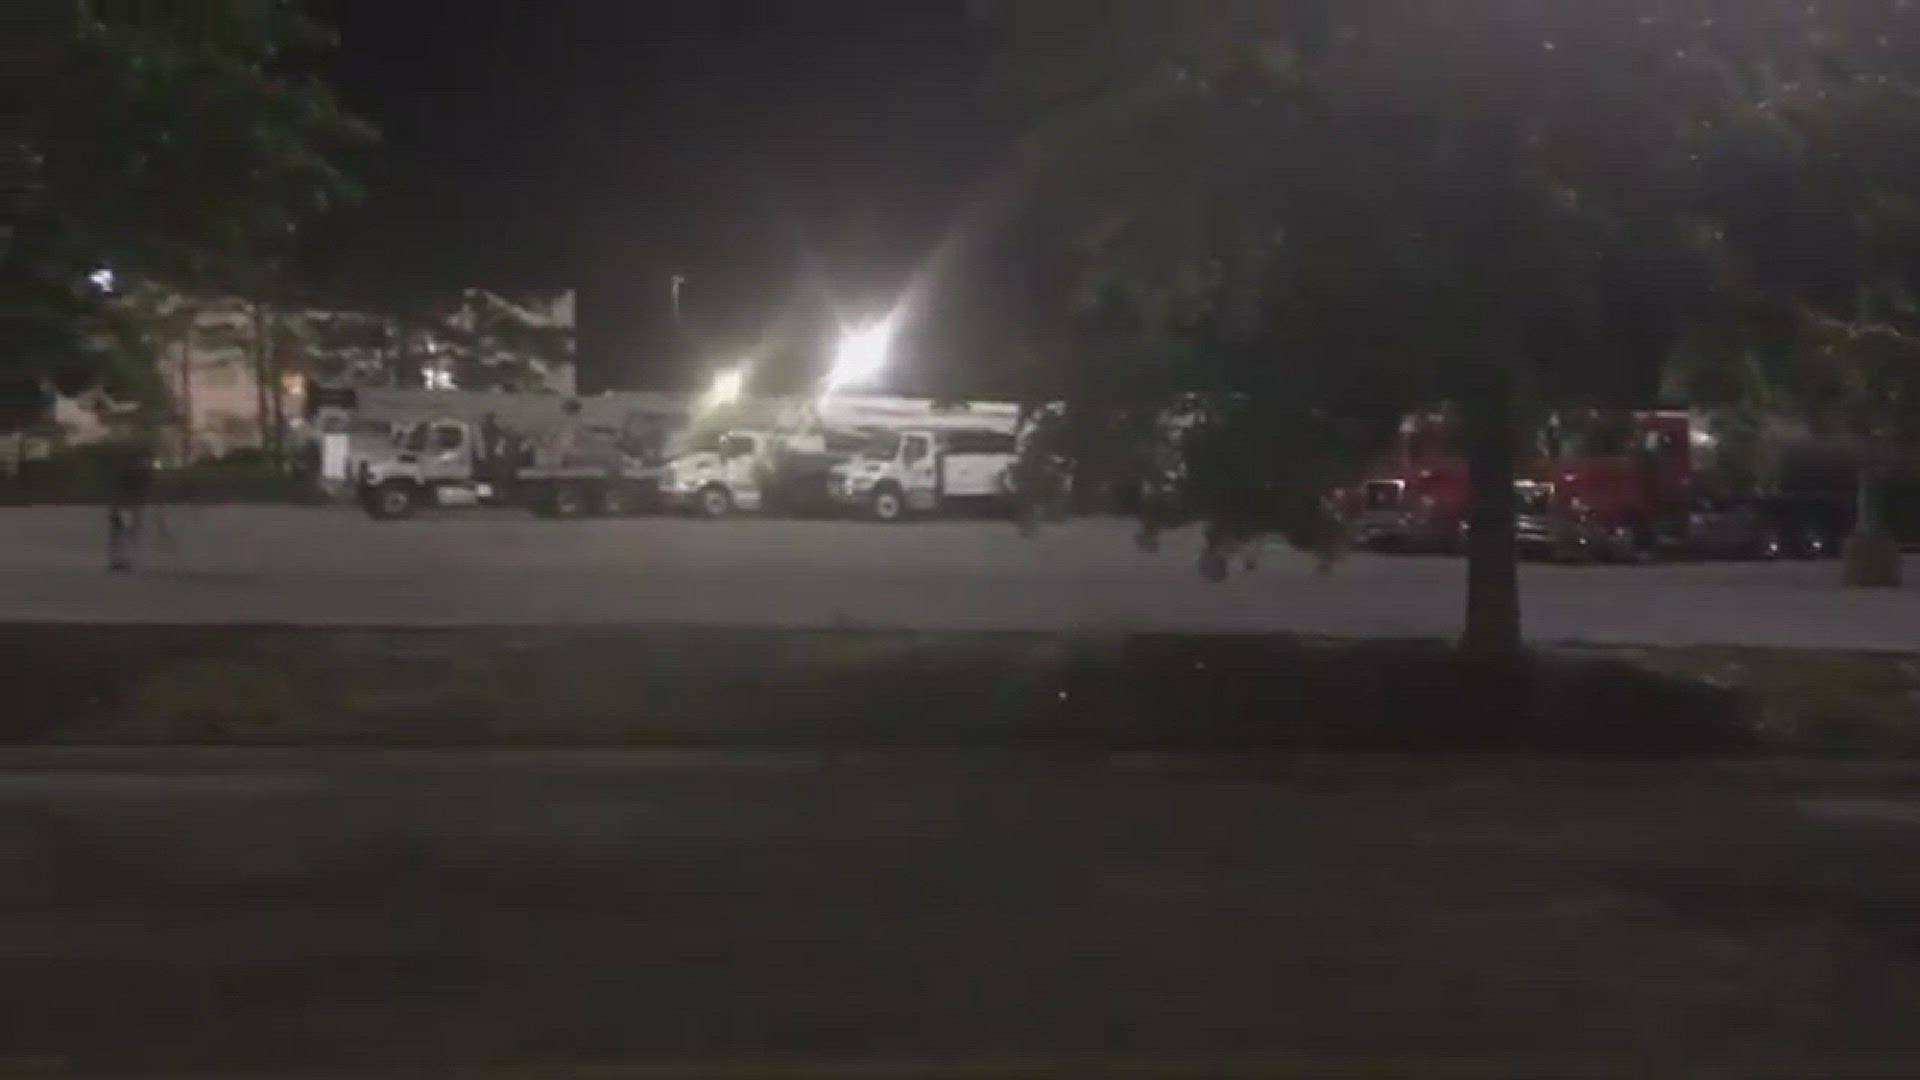 Line trucks are preparing for Hurricane Florence by staging at least 100 line trucks outside Columbiana Mall.